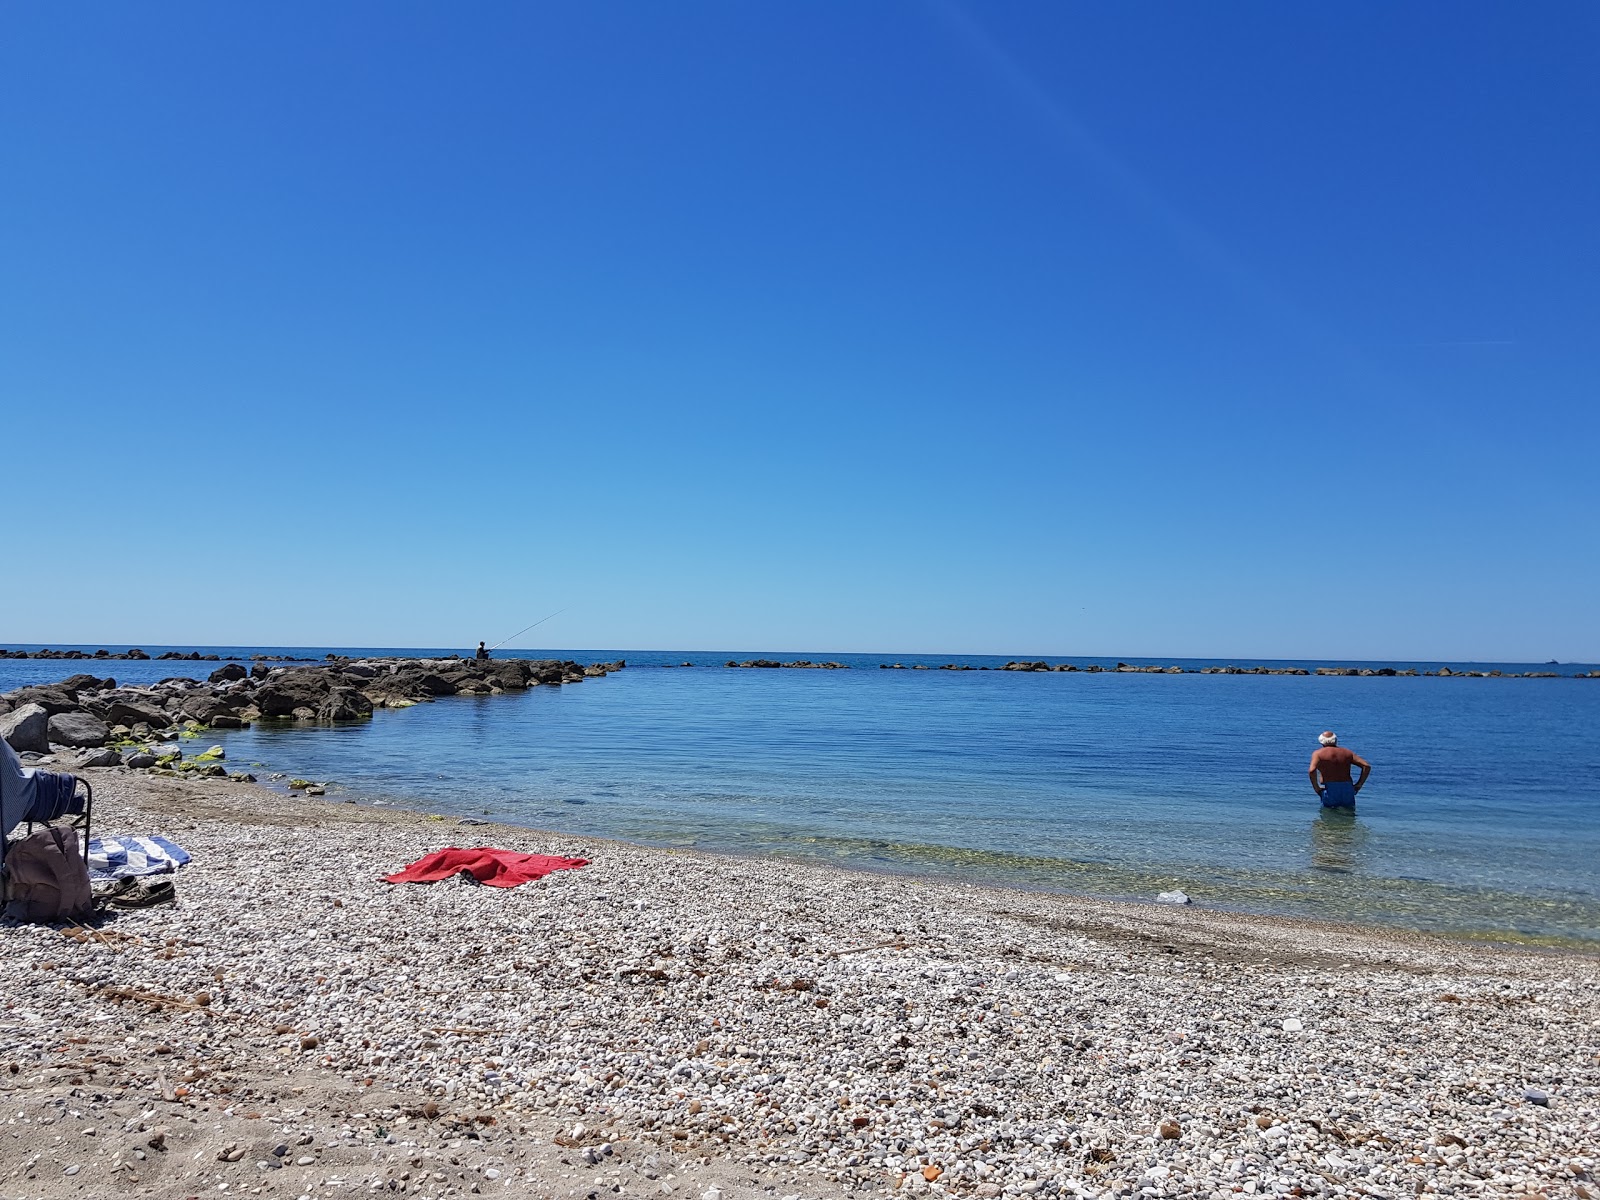 Photo of Spiaggia Marina Di Massa with blue water surface